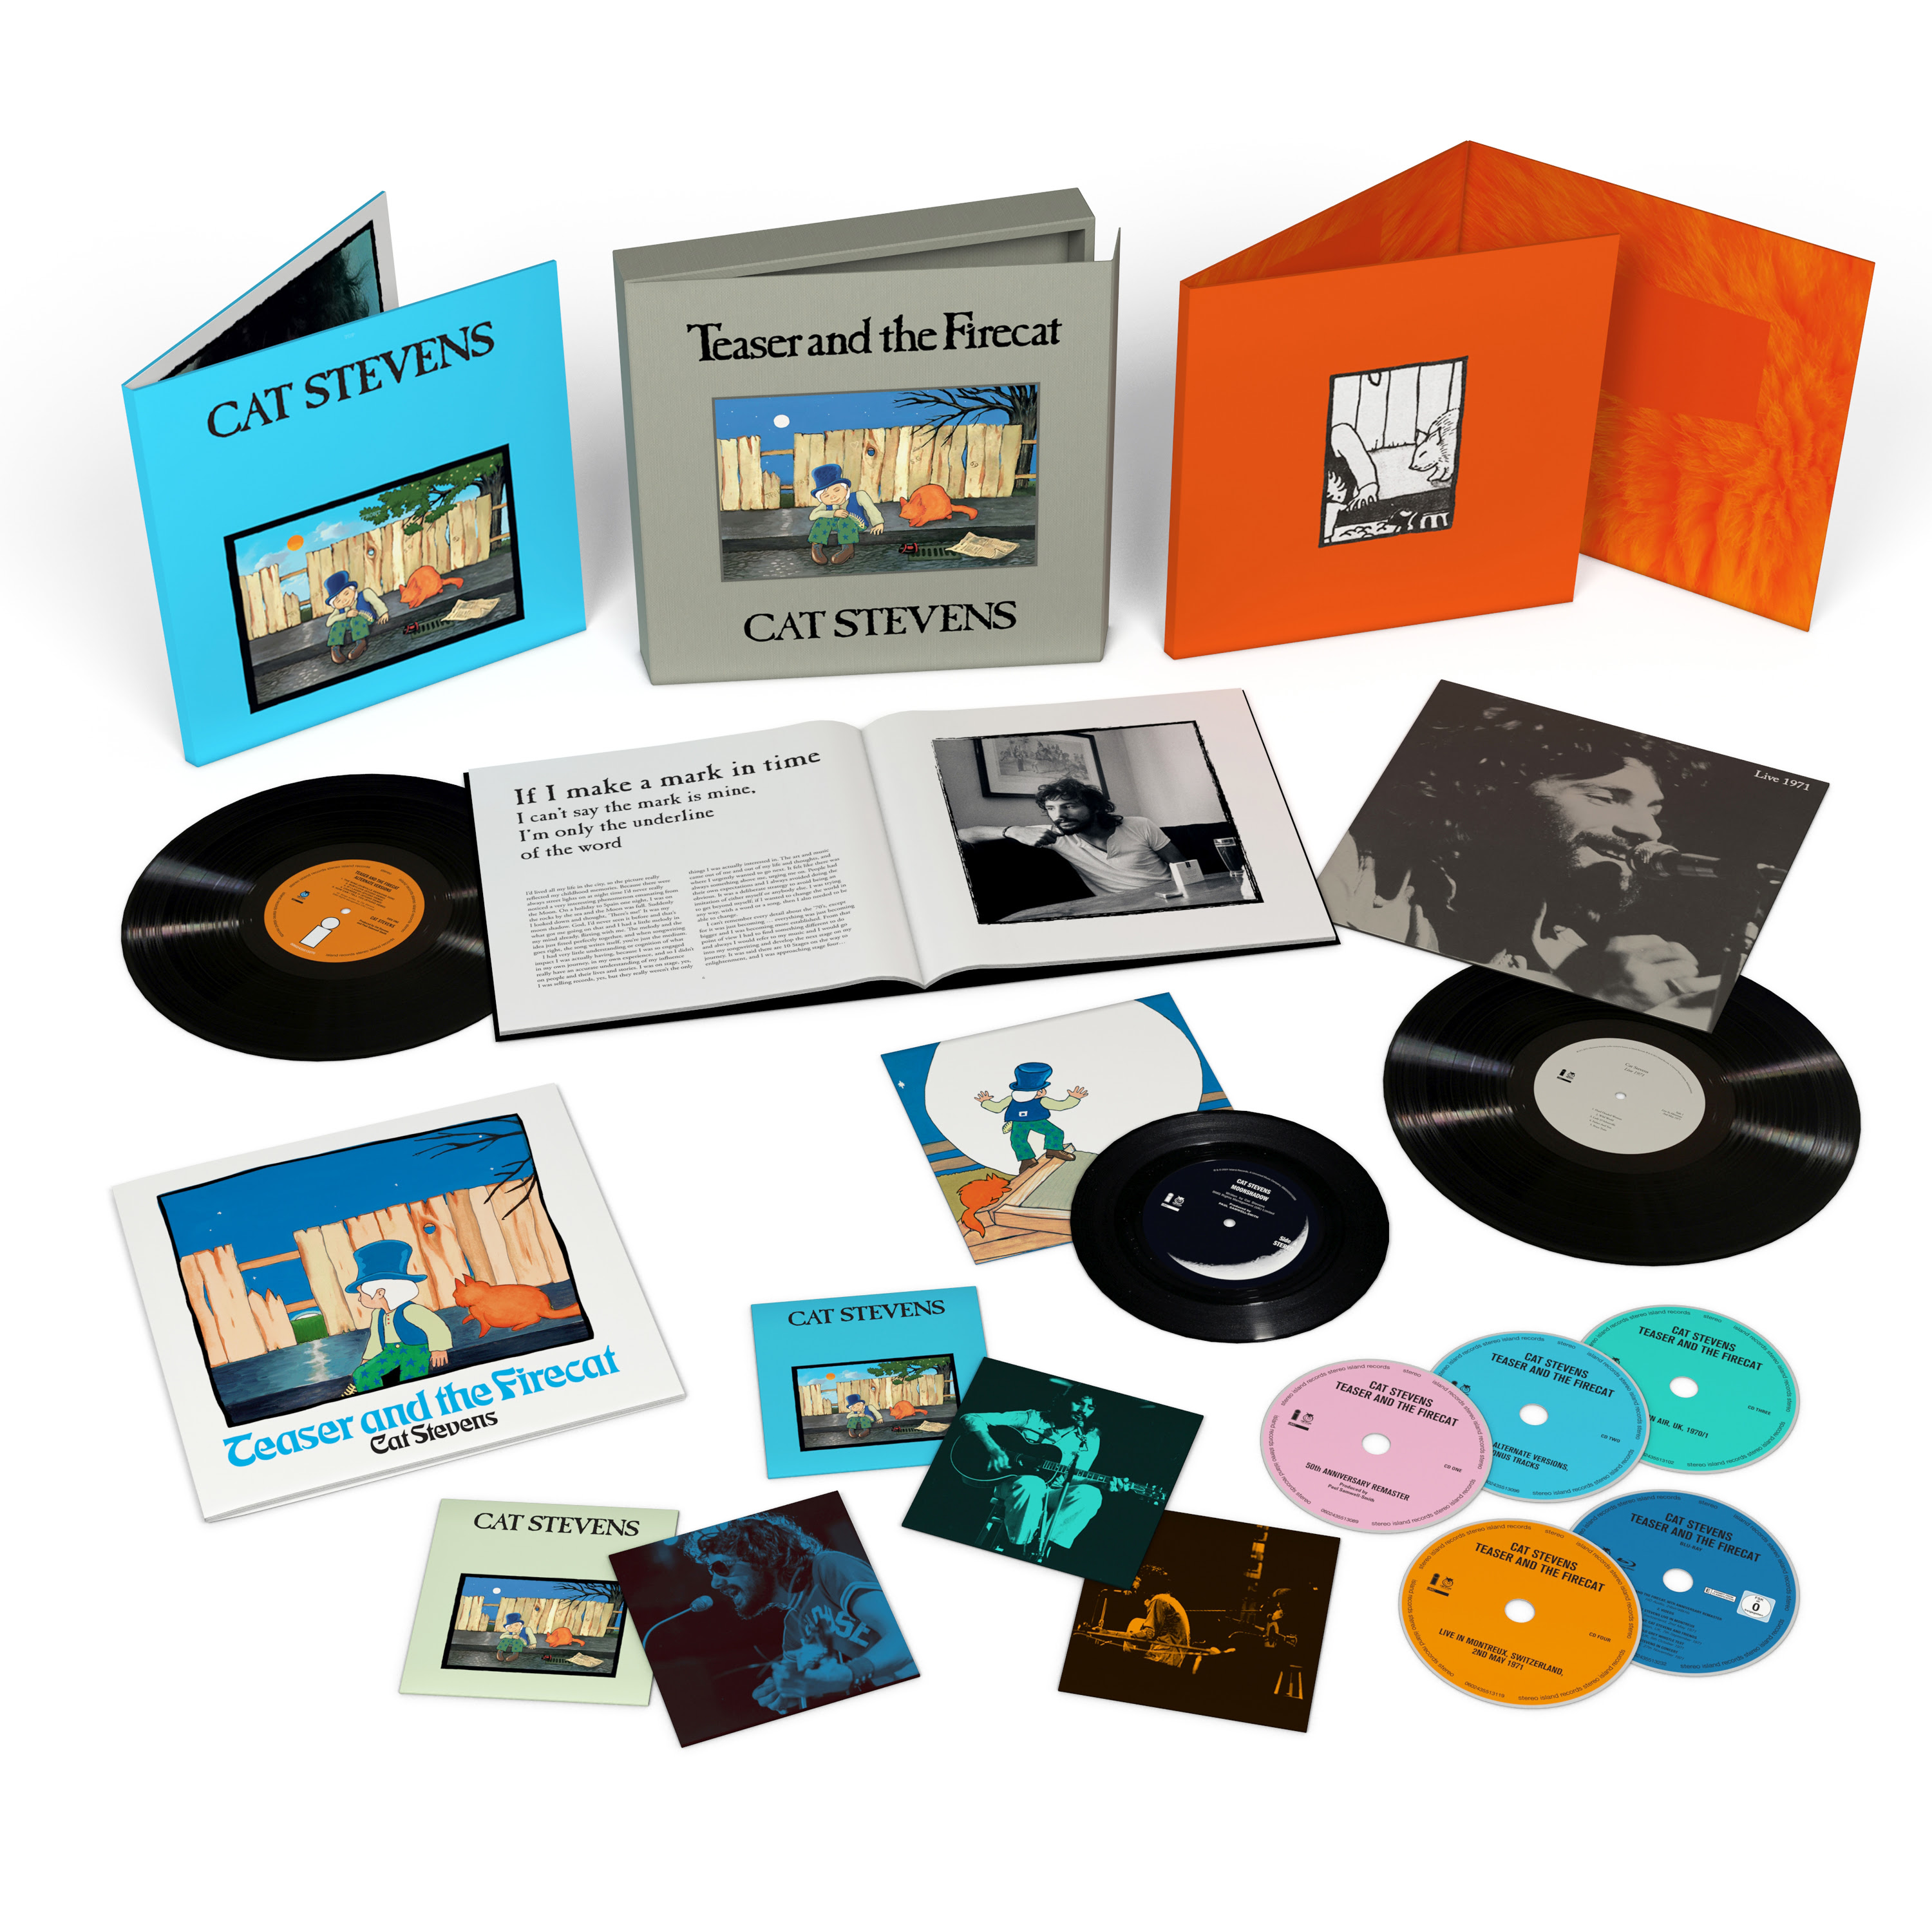 Yusuf / Cat Stevens Teaser And The Firecat (50th Anniversary Super Deluxe Edition Box Set)